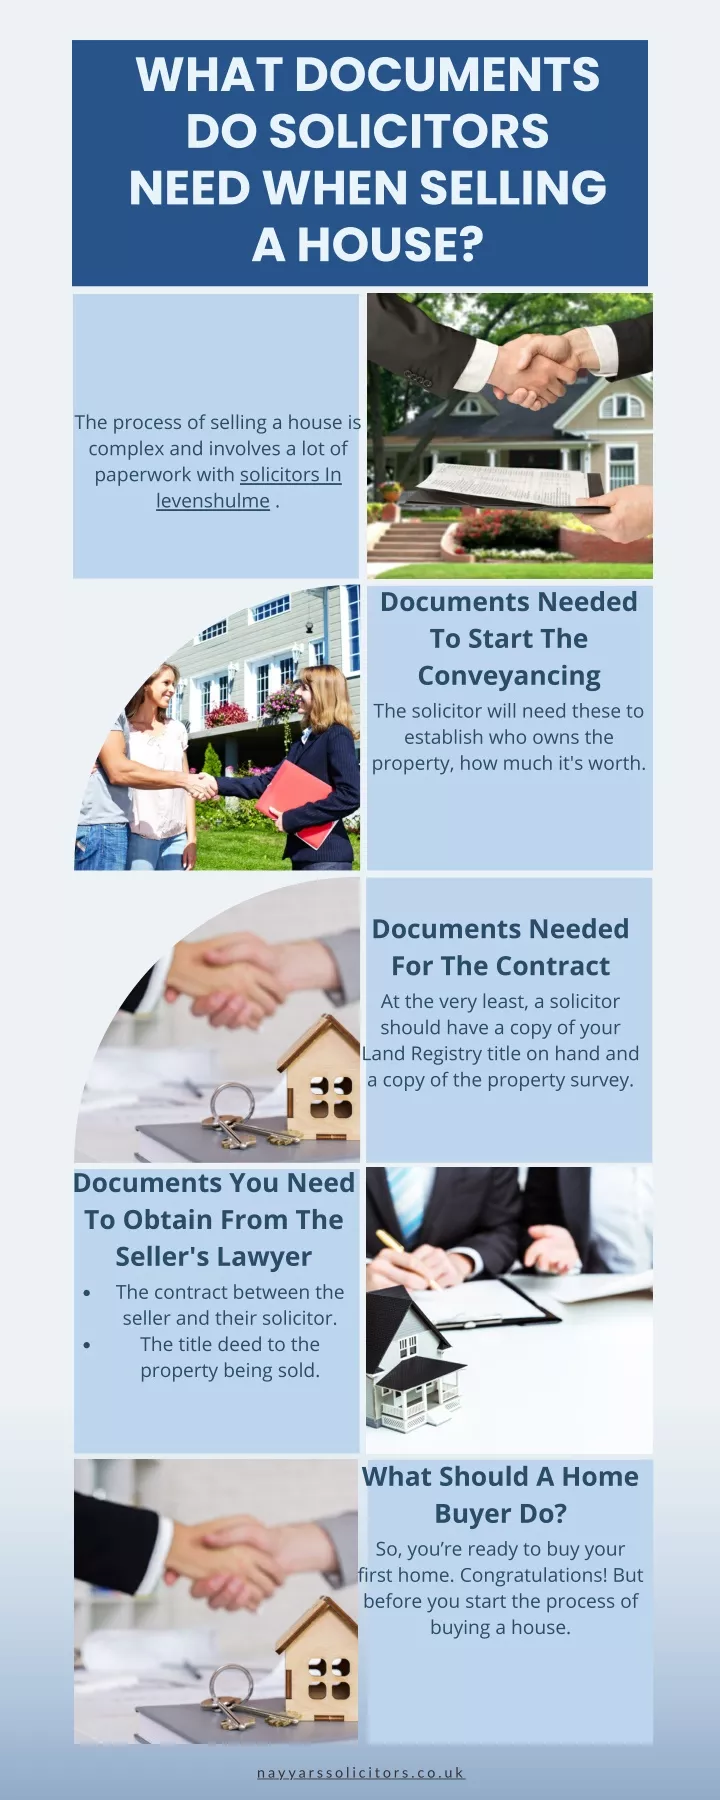 what documents do solicitors need when selling